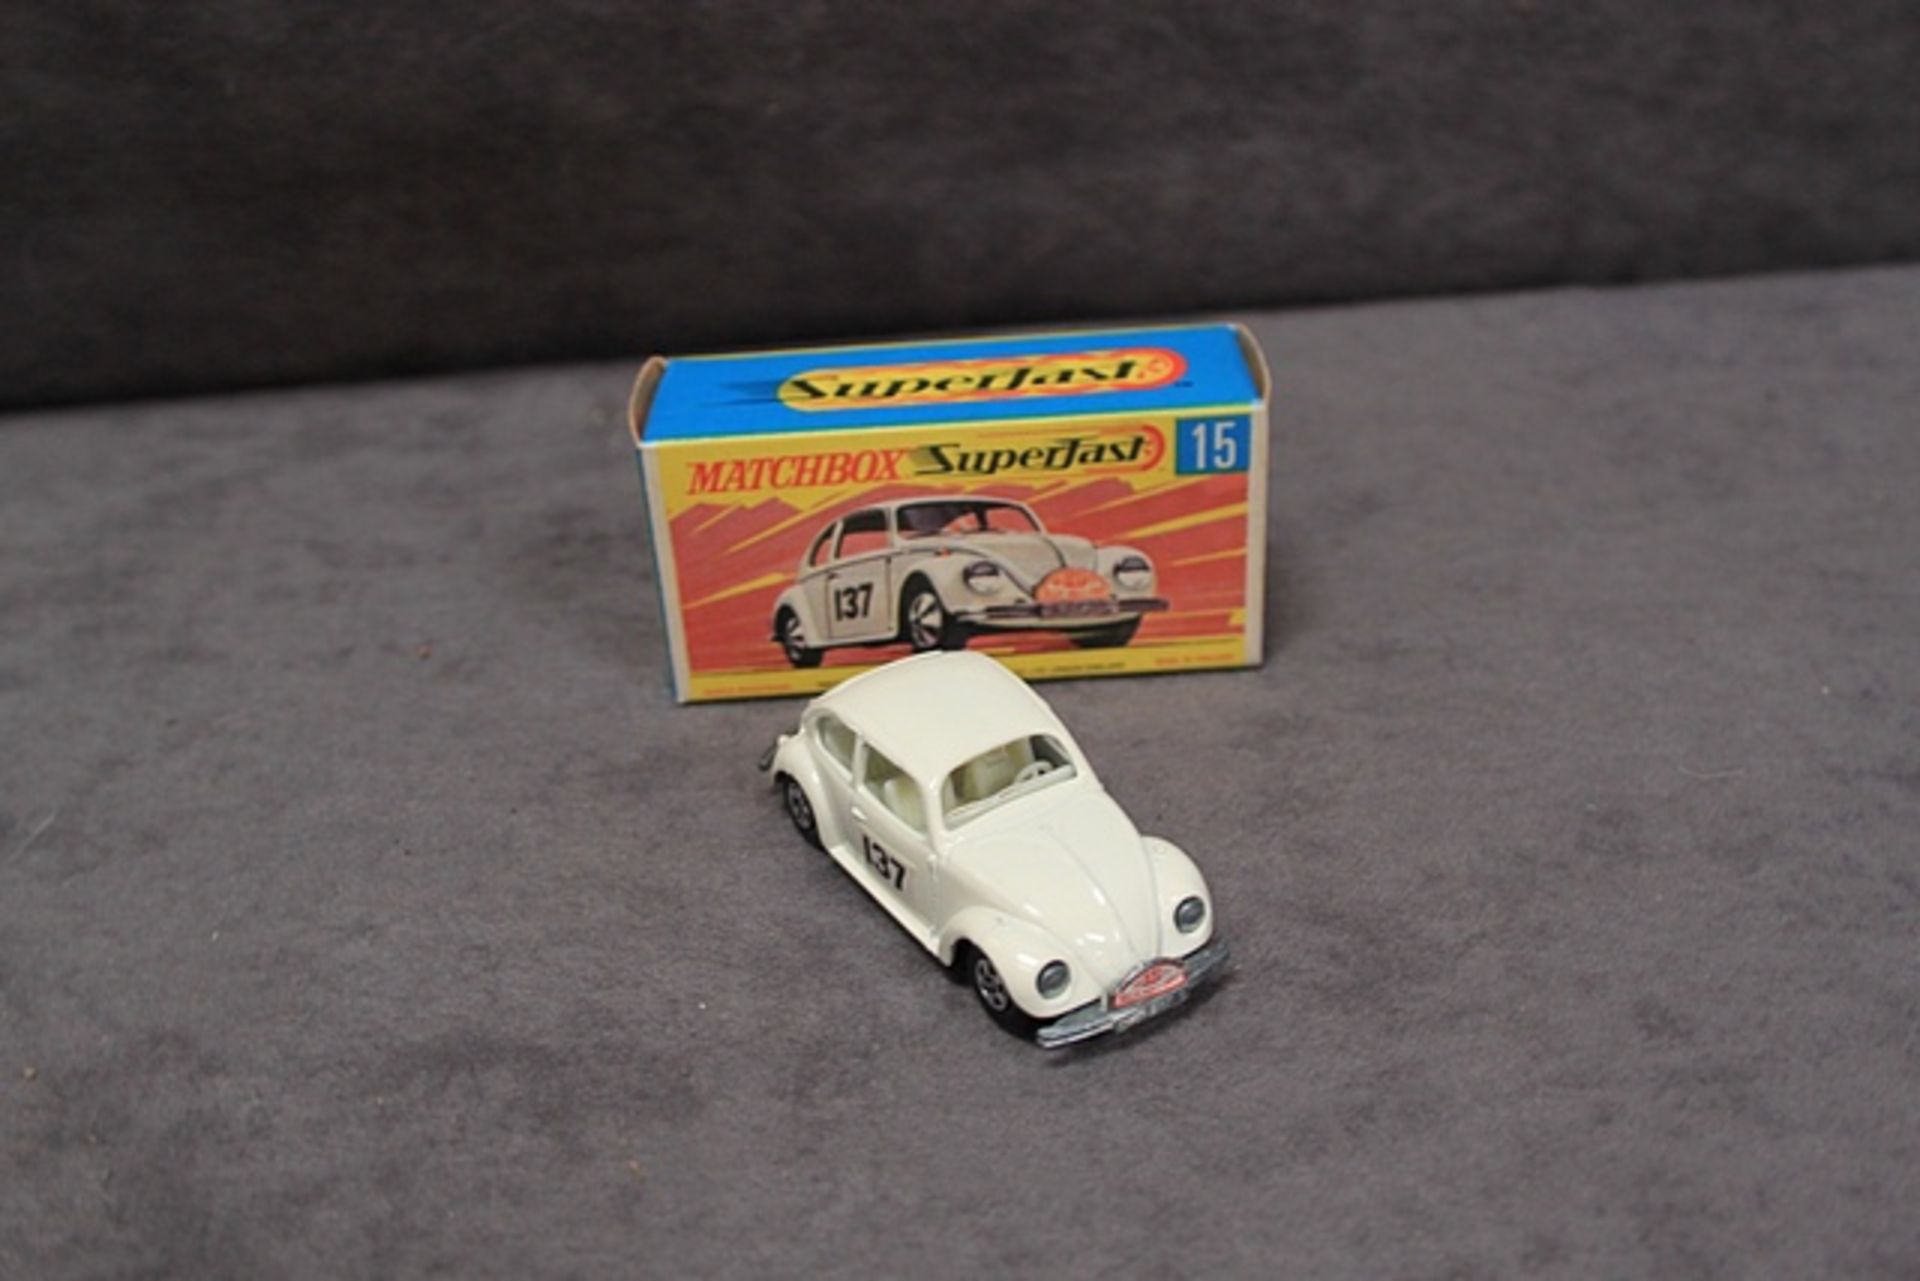 Mint Matchbox Superfast diecast #15 Volkswagen in white (Monte Carlo rally Version) with in crisp - Image 2 of 2